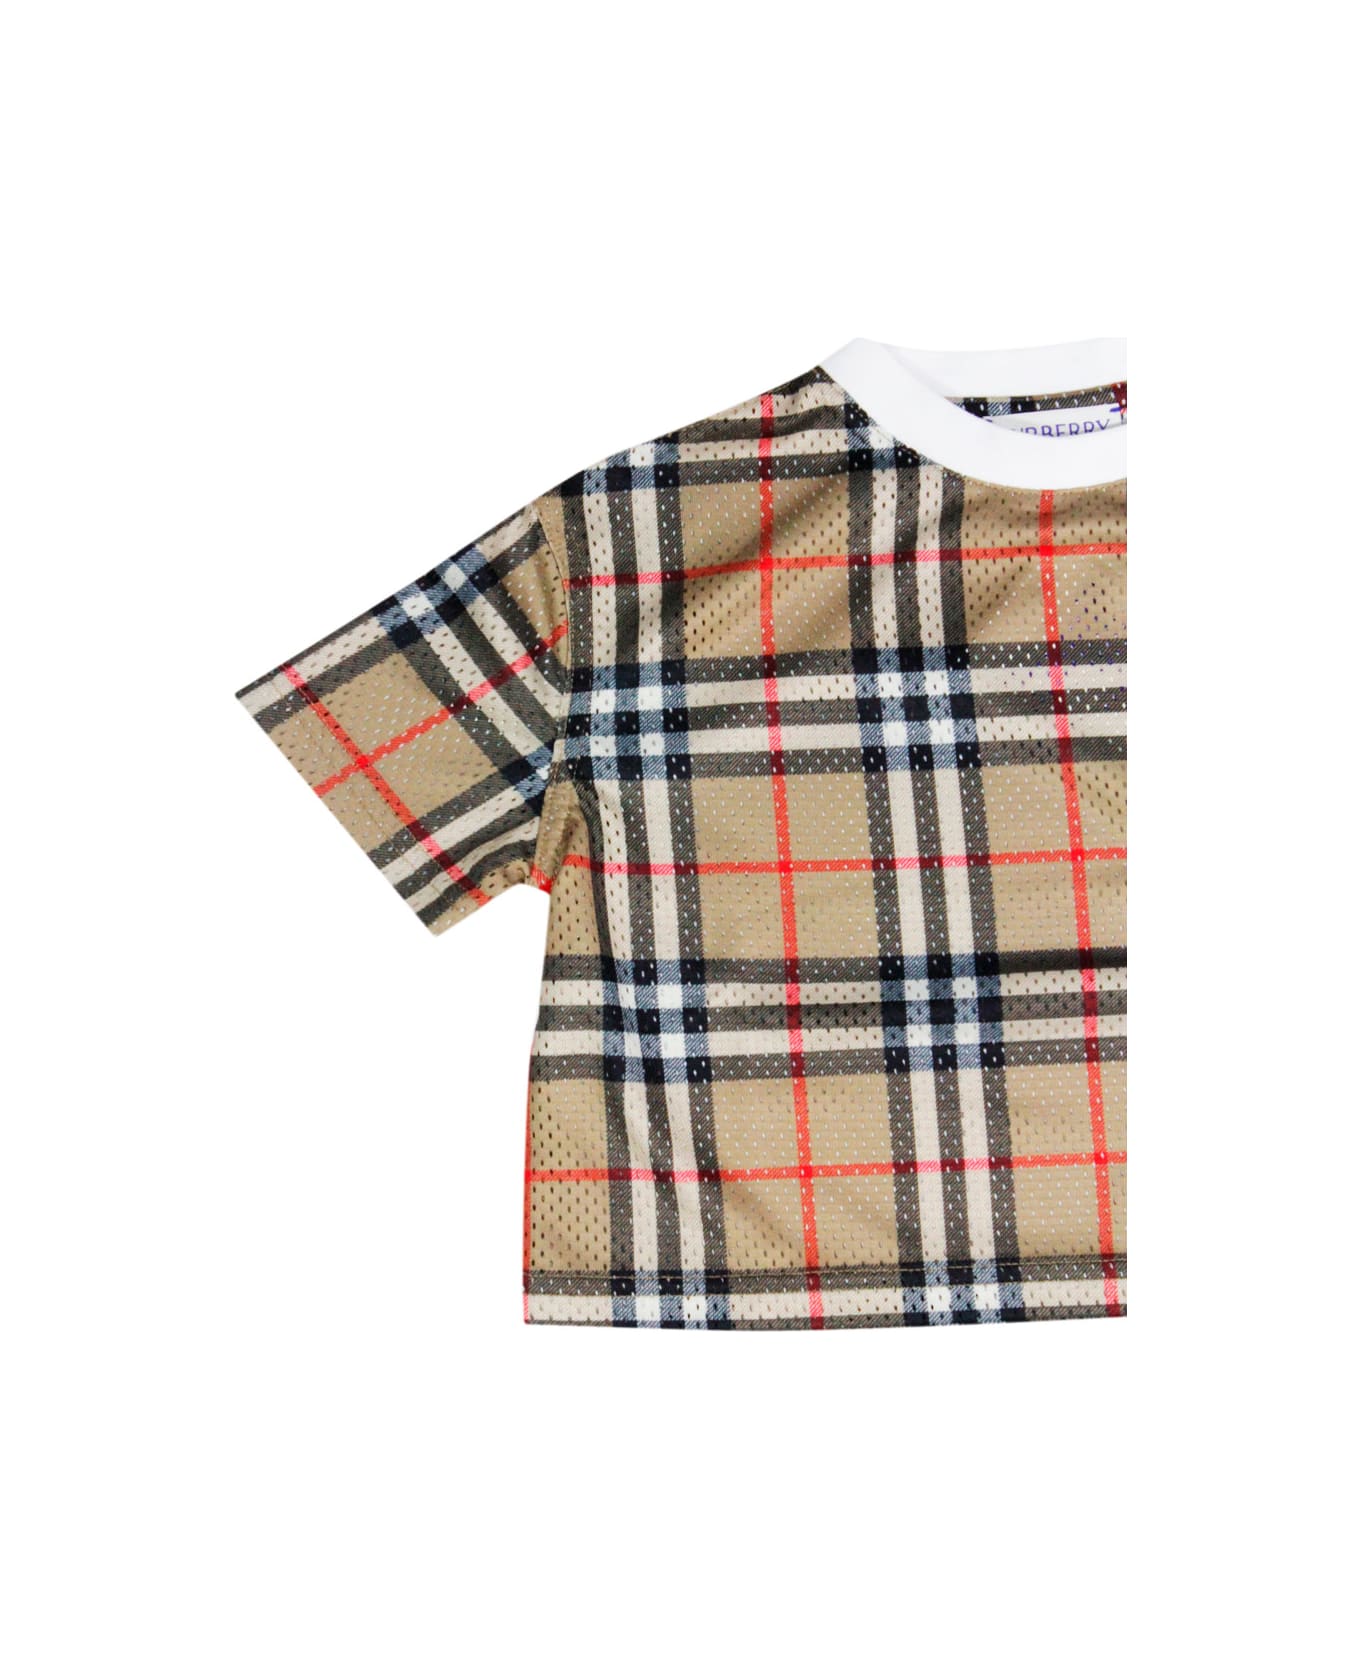 Burberry Crew-neck, Short-sleeved T-shirt In Perforated Fabric With Check Pattern And Small Buttons On The Shoulder. - Beige